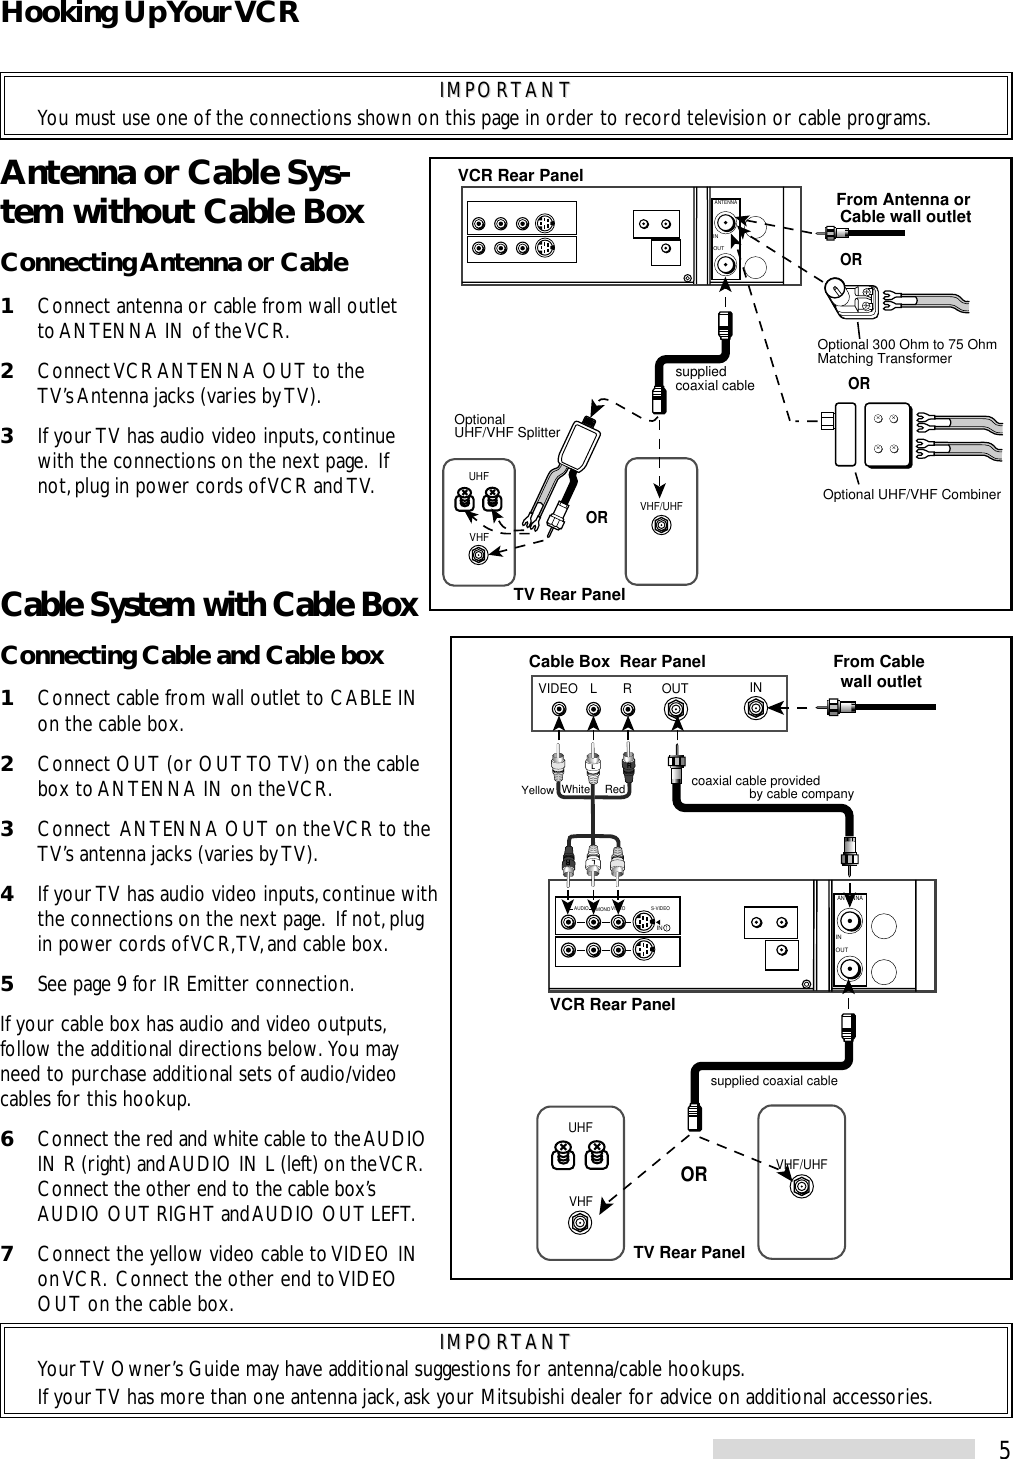 5Antenna or Cable Sys-tem without Cable BoxConnecting Antenna or Cable1Connect antenna or cable from wall outletto ANTENNA IN of the VCR.2Connect VCR ANTENNA OUT to theTV’s Antenna jacks (varies by TV).3If your TV has audio video inputs, continuewith the connections on the next page.  Ifnot, plug in power cords of VCR and TV.VHFUHFVHF/UHFANTENNAOUTINxxxxVCR Rear PanelTV Rear PanelOROptionalUHF/VHF SplitterOptional 300 Ohm to 75 OhmMatching Transformer Optional UHF/VHF CombinerORsupplied coaxial cableORFrom Antenna or Cable wall outletVHF/UHFVHFUHFINOUTVIDEO L RANTENNAOUTINVIDEOAUDIOR L/MONO S-VIDEOIN  1LRLRWhite RedYellowTV Rear PanelVCR Rear PanelORFrom Cable wall outletCable Box  Rear Panelcoaxial cable provided                by cable companysupplied coaxial cableIMPORTANTIMPORTANTYou must use one of the connections shown on this page in order to record television or cable programs.Cable System with Cable BoxConnecting Cable and Cable box1Connect cable from wall outlet to CABLE INon the cable box.2Connect OUT (or OUT TO TV) on the cablebox to ANTENNA IN on the VCR.3Connect  ANTENNA OUT on the VCR to theTV’s antenna jacks (varies by TV).4If your TV has audio video inputs, continue withthe connections on the next page.  If not, plugin power cords of VCR, TV, and cable box.5See page 9 for IR Emitter connection.If your cable box has audio and video outputs,follow the additional directions below.  You mayneed to purchase additional sets of audio/videocables for this hookup.6Connect the red and white cable to the AUDIOIN R (right) and AUDIO IN L (left) on the VCR.Connect the other end to the cable box’sAUDIO OUT RIGHT and AUDIO OUT LEFT.7Connect the yellow video cable to VIDEO INon VCR.  Connect the other end to VIDEOOUT on the cable box.IMPORTANTIMPORTANTYour TV Owner’s Guide may have additional suggestions for antenna/cable hookups.If your TV has more than one antenna jack, ask your Mitsubishi dealer for advice on additional accessories.Hooking Up Your VCR